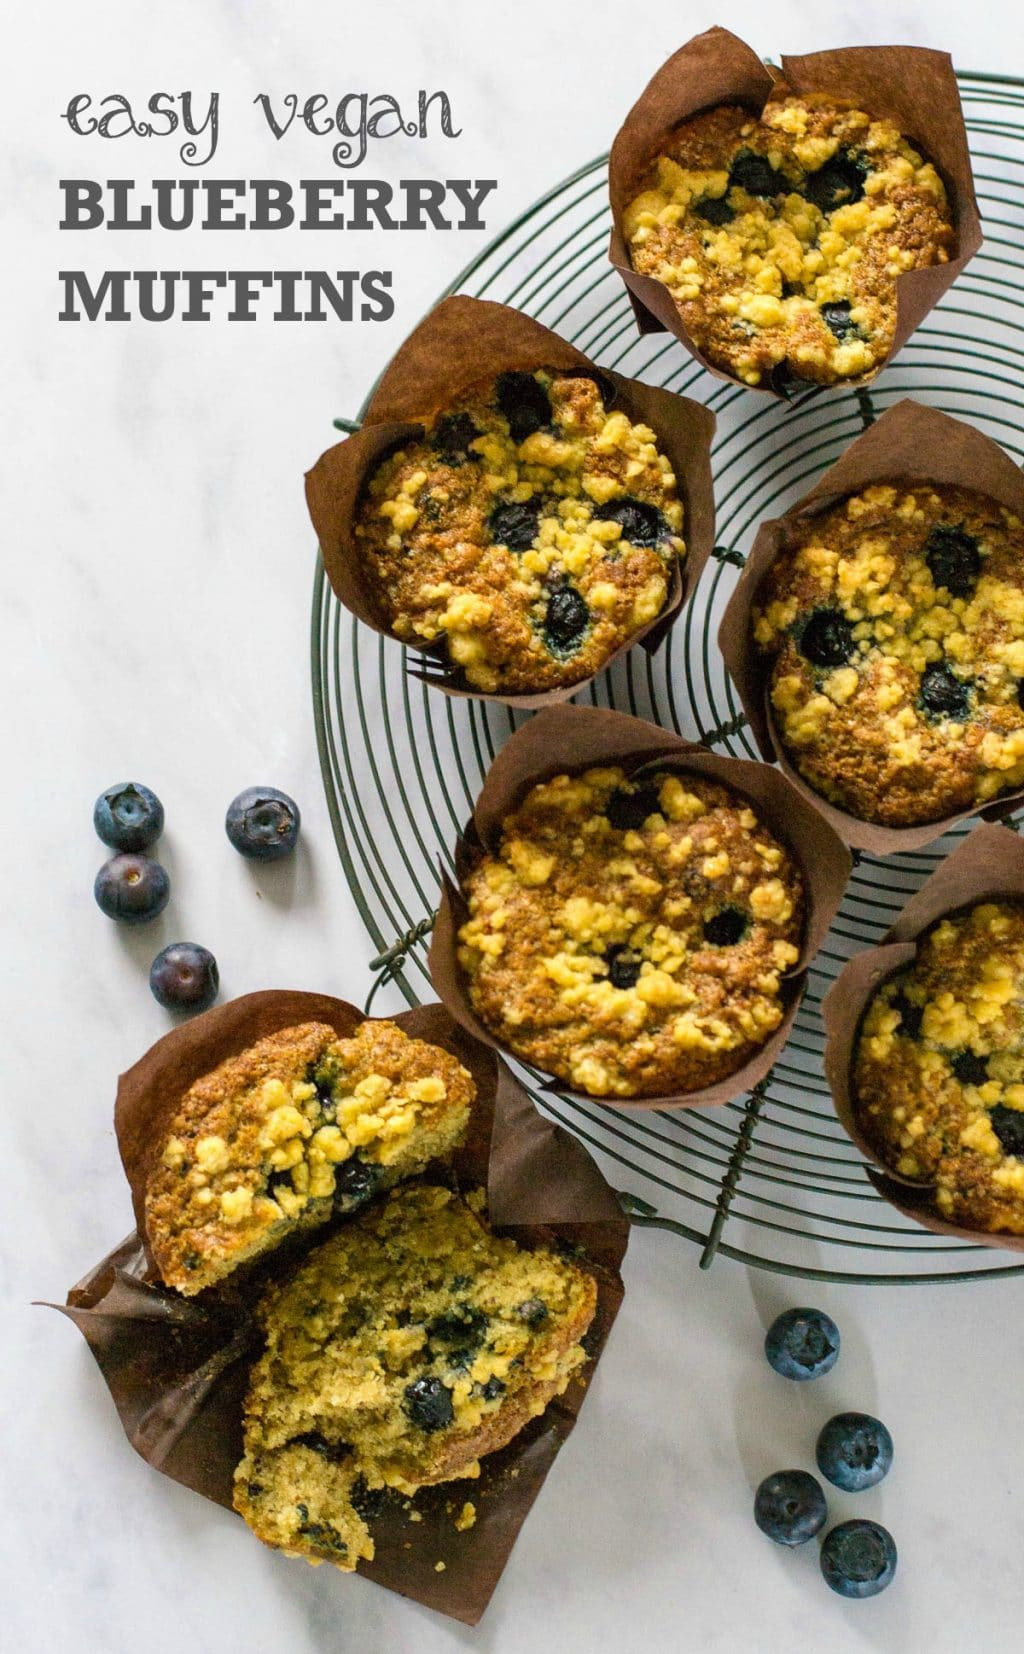 Easy Vegan Blueberry Muffins
 Vegan Blueberry Muffins with Streusel Topping